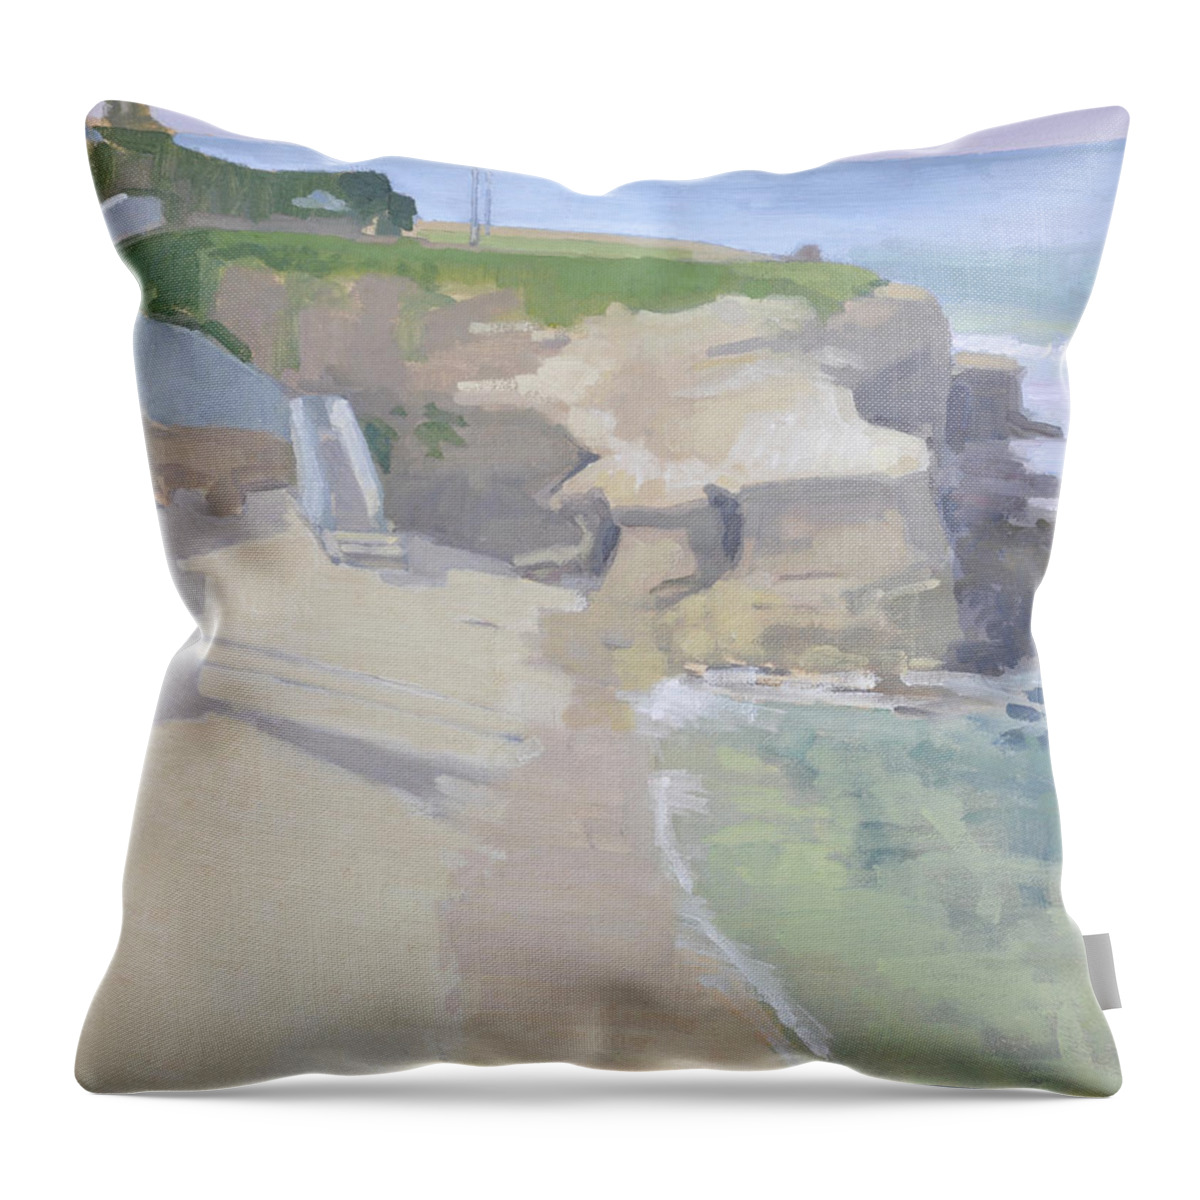 La Jolla Cove Throw Pillow featuring the painting Above La Jolla Cove, San Diego by Paul Strahm